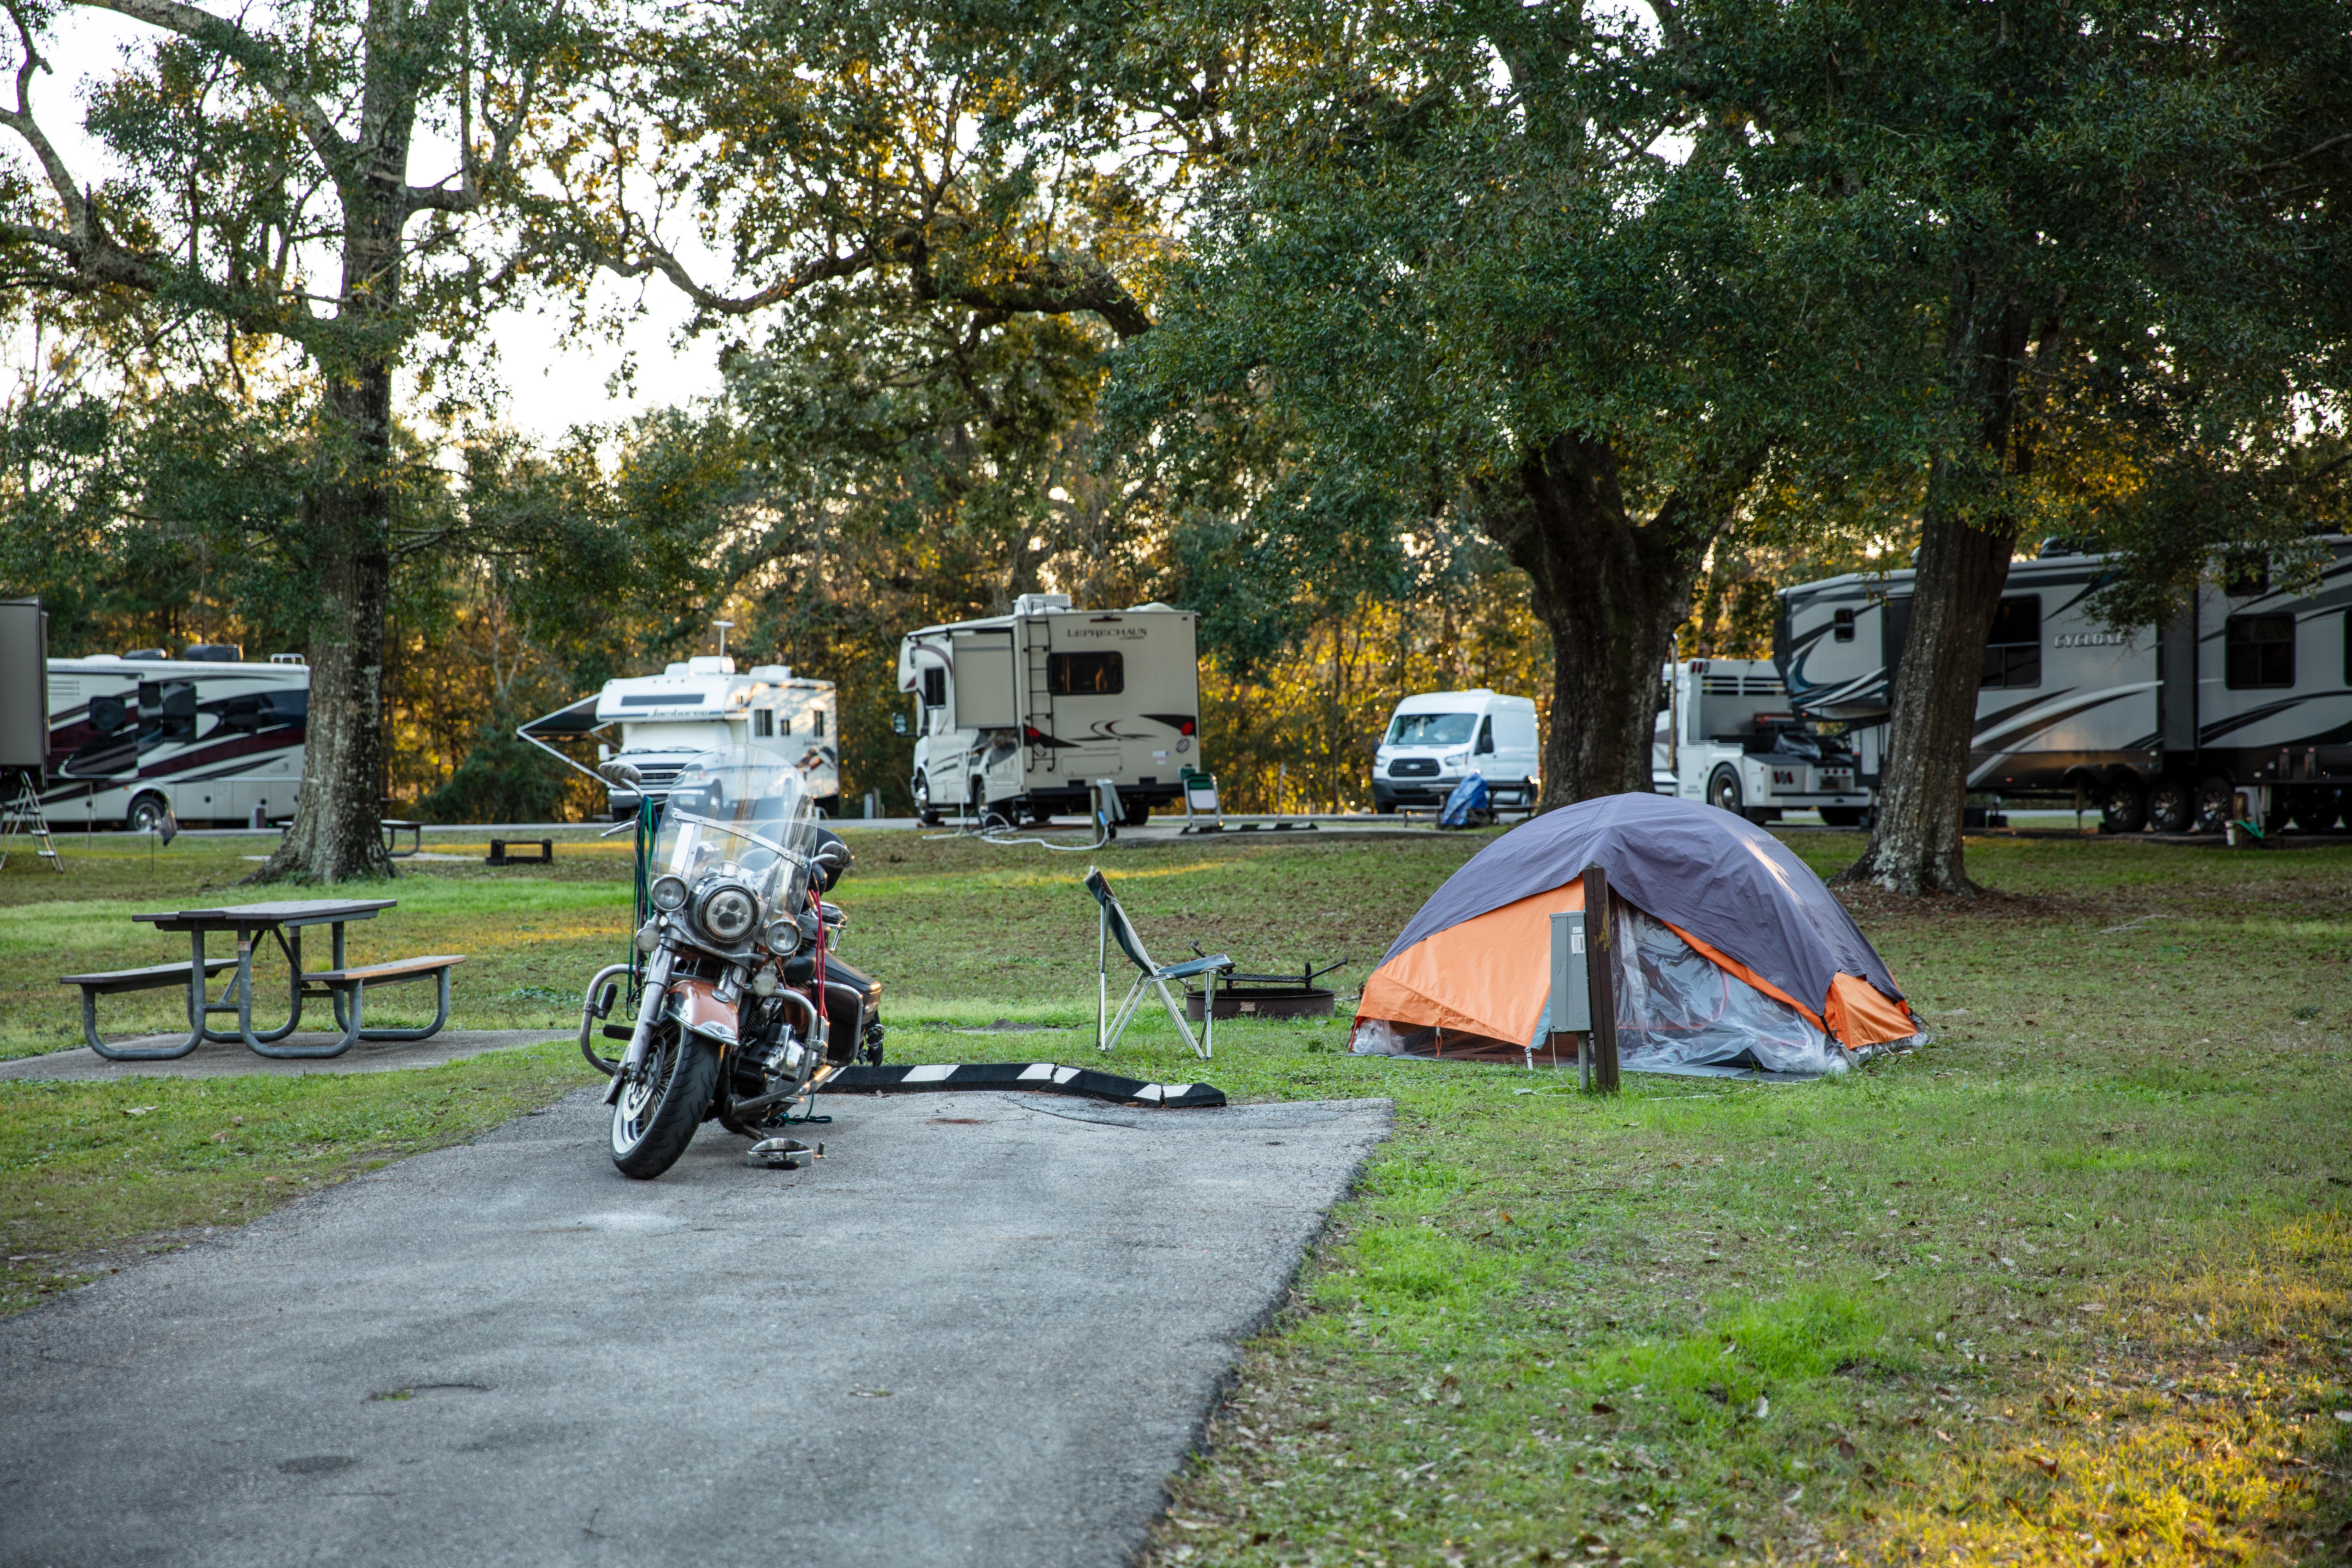 A motorcyle stands at a grassy tent campsite.